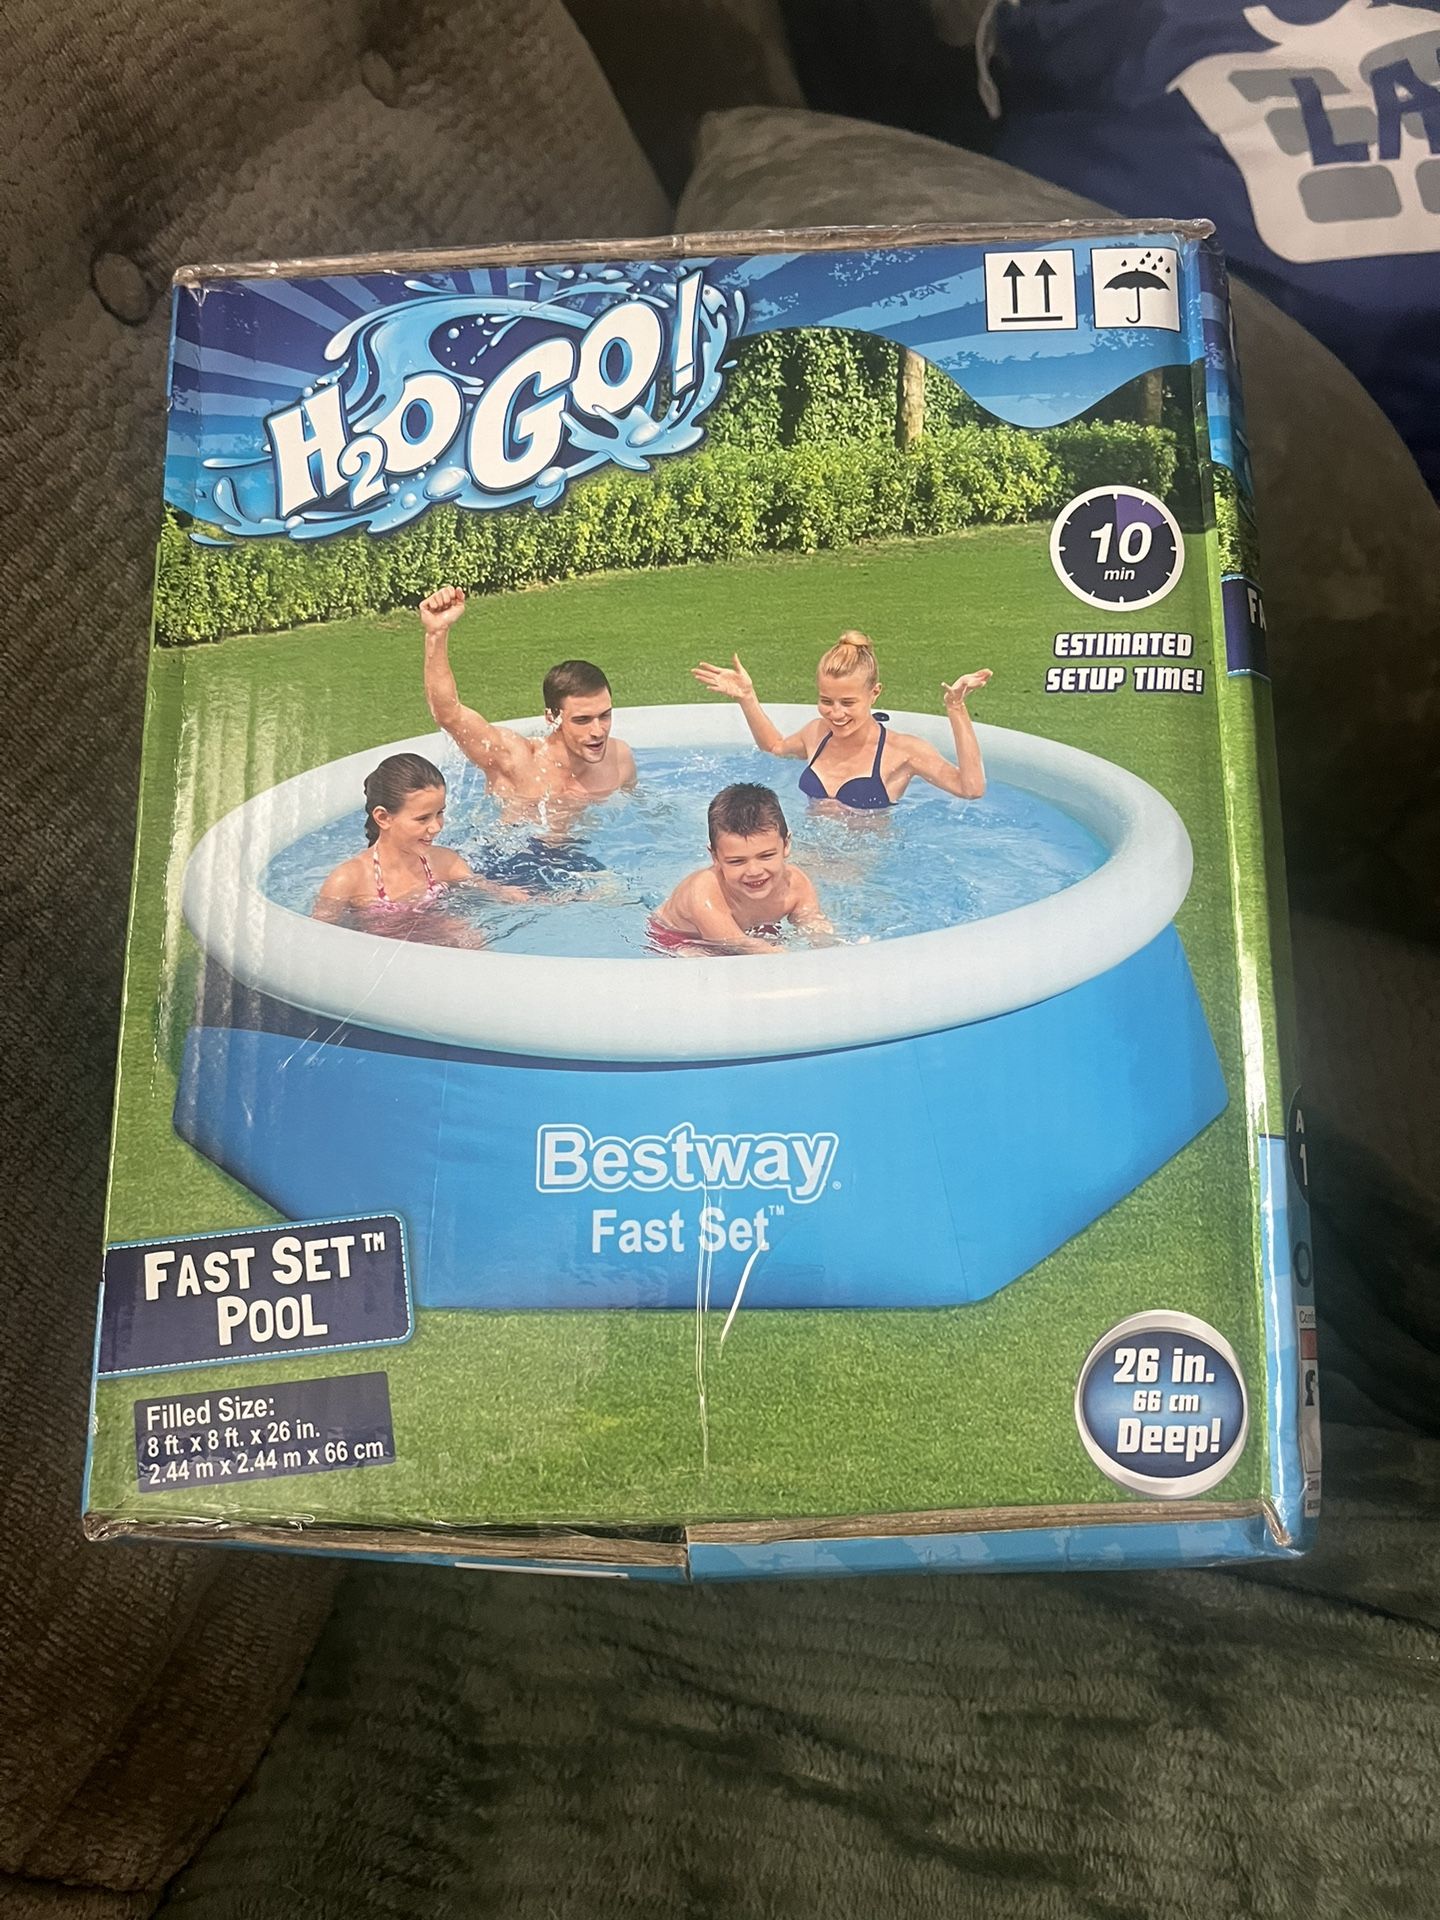 Brand New Pool & Cordless Cleaner